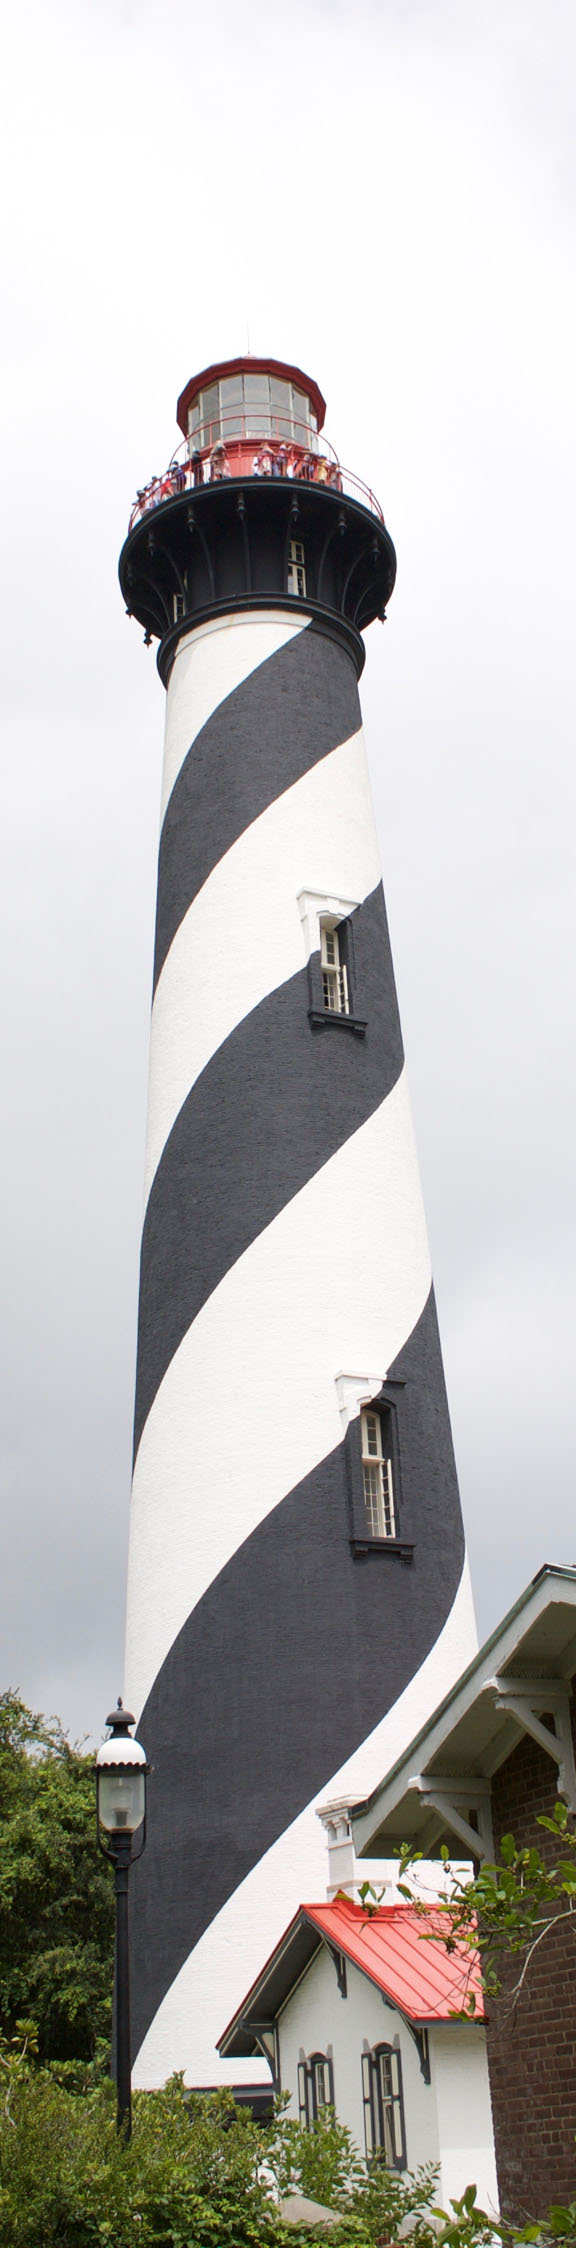 Florida Lighthouses Welcome Visitors